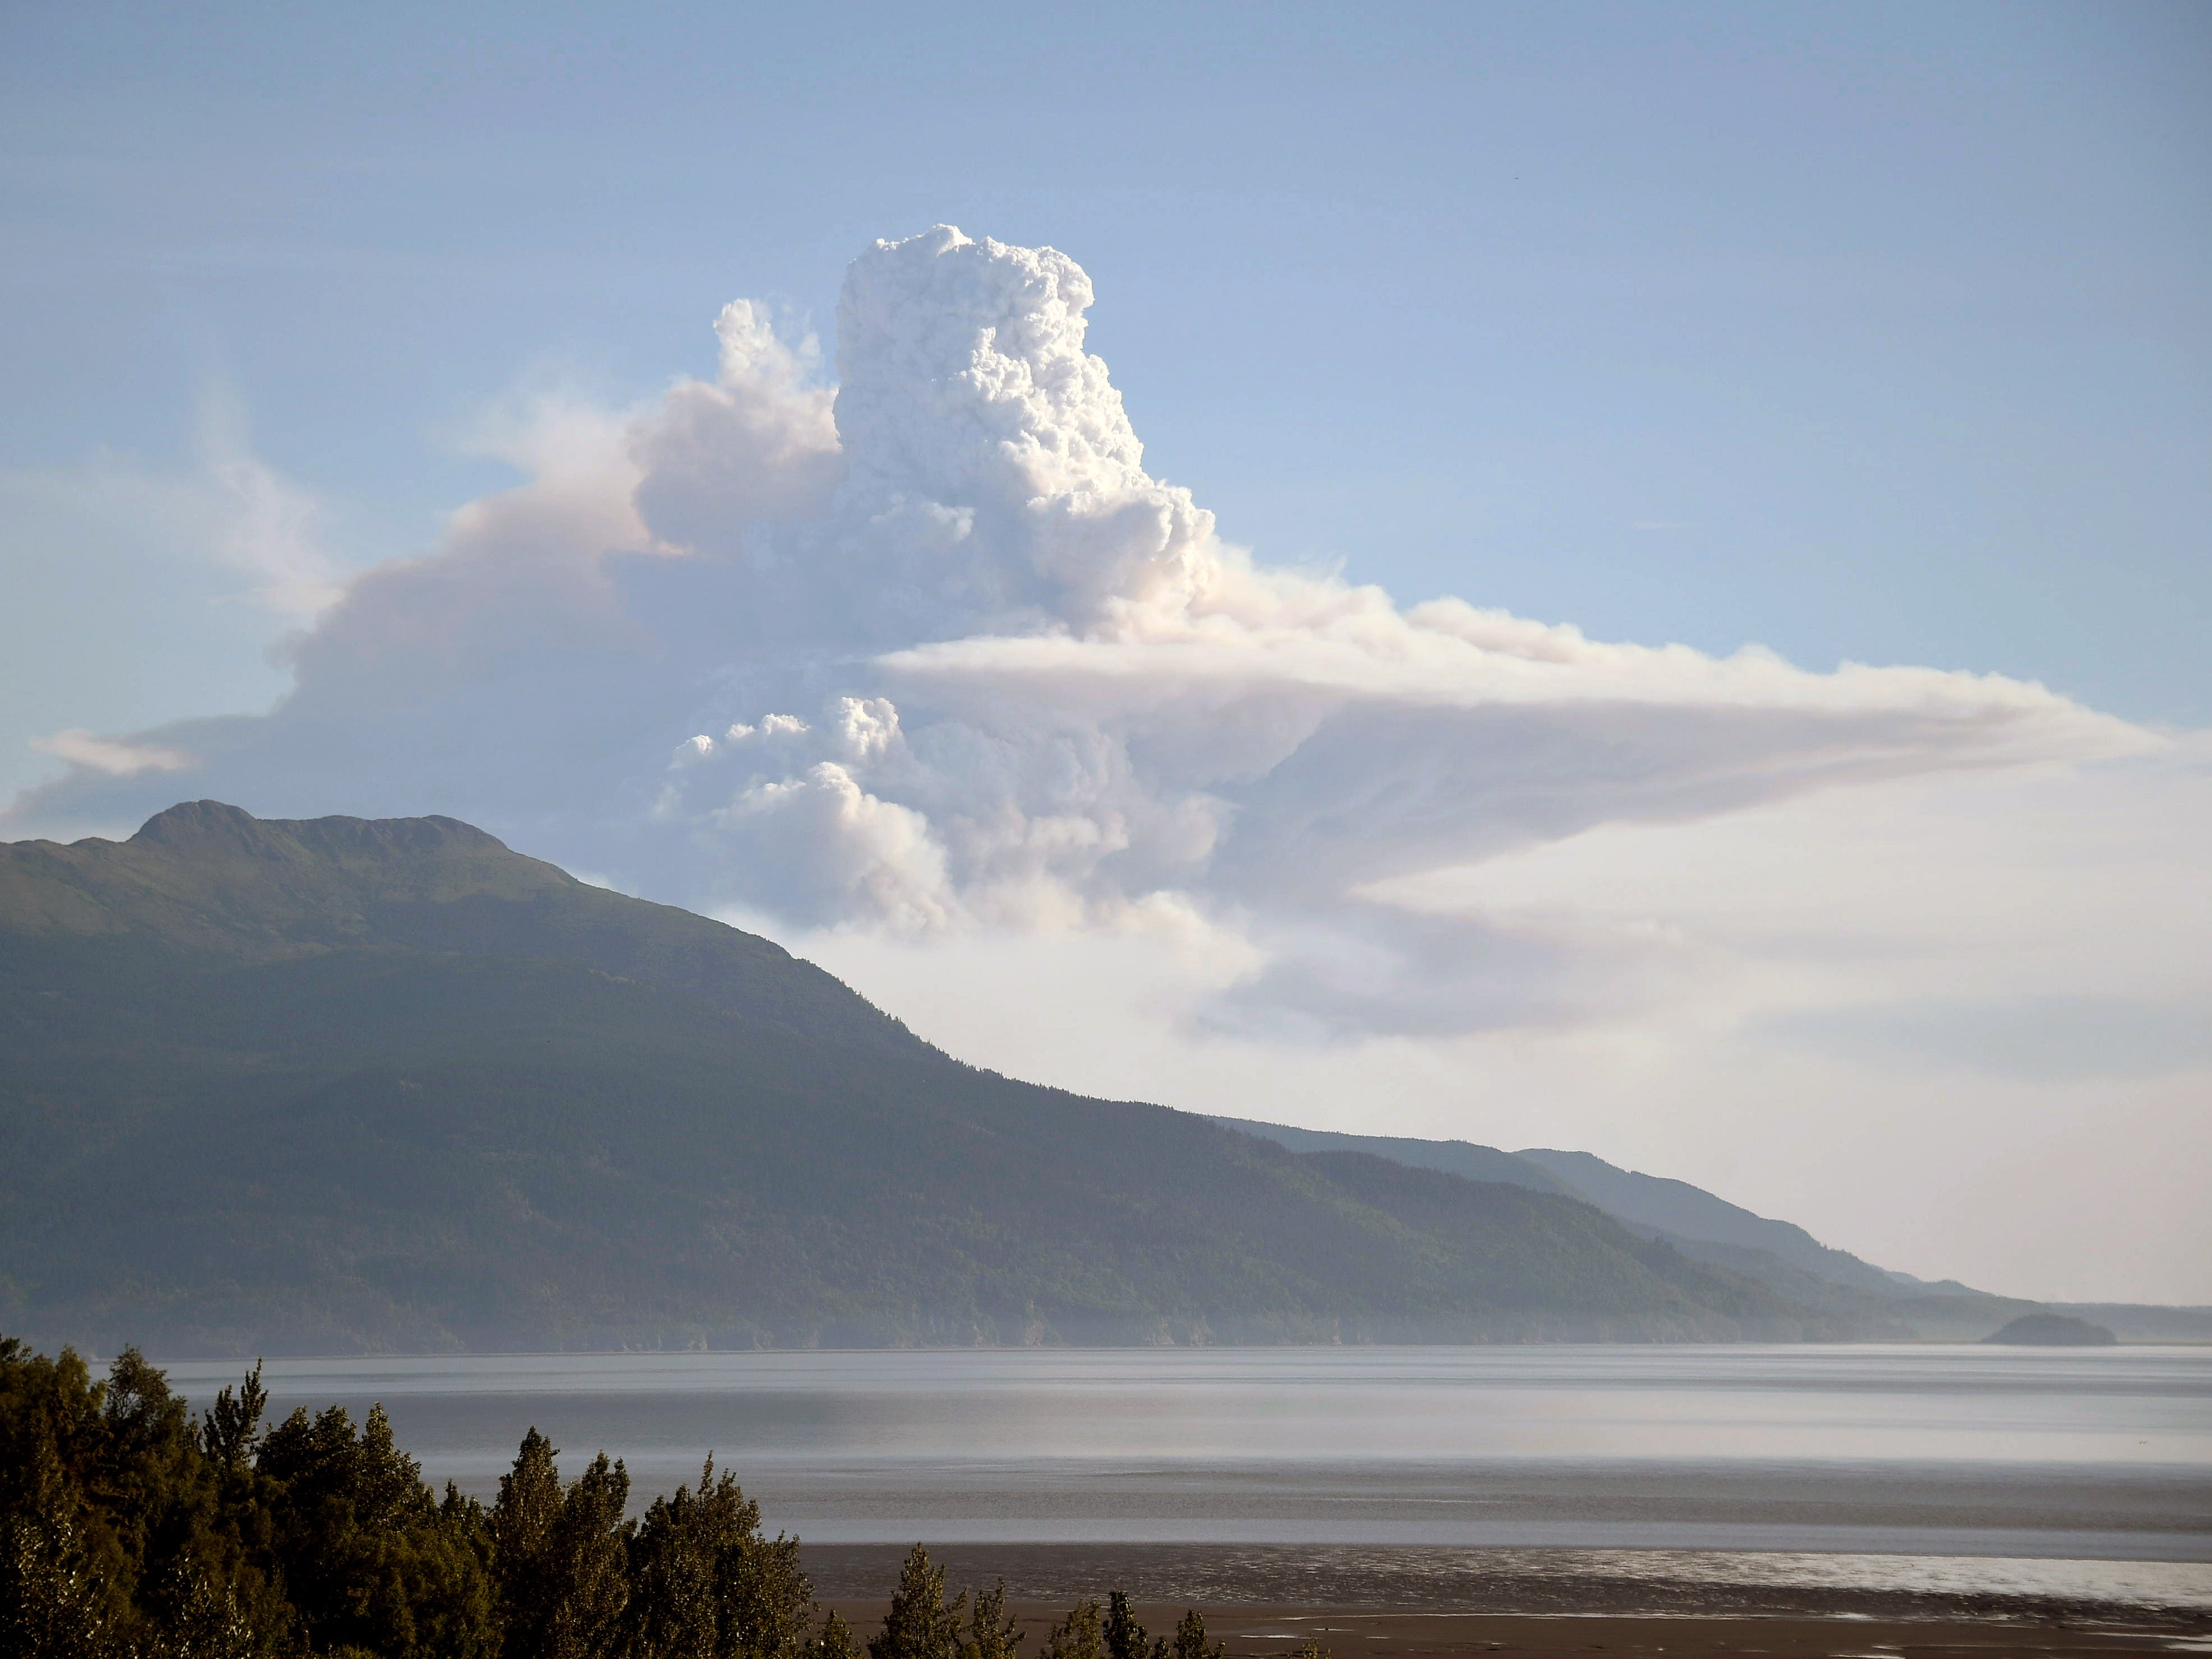 Smoke rises from a wildfire near Anchorage in Alaska during the 2019 heatwave